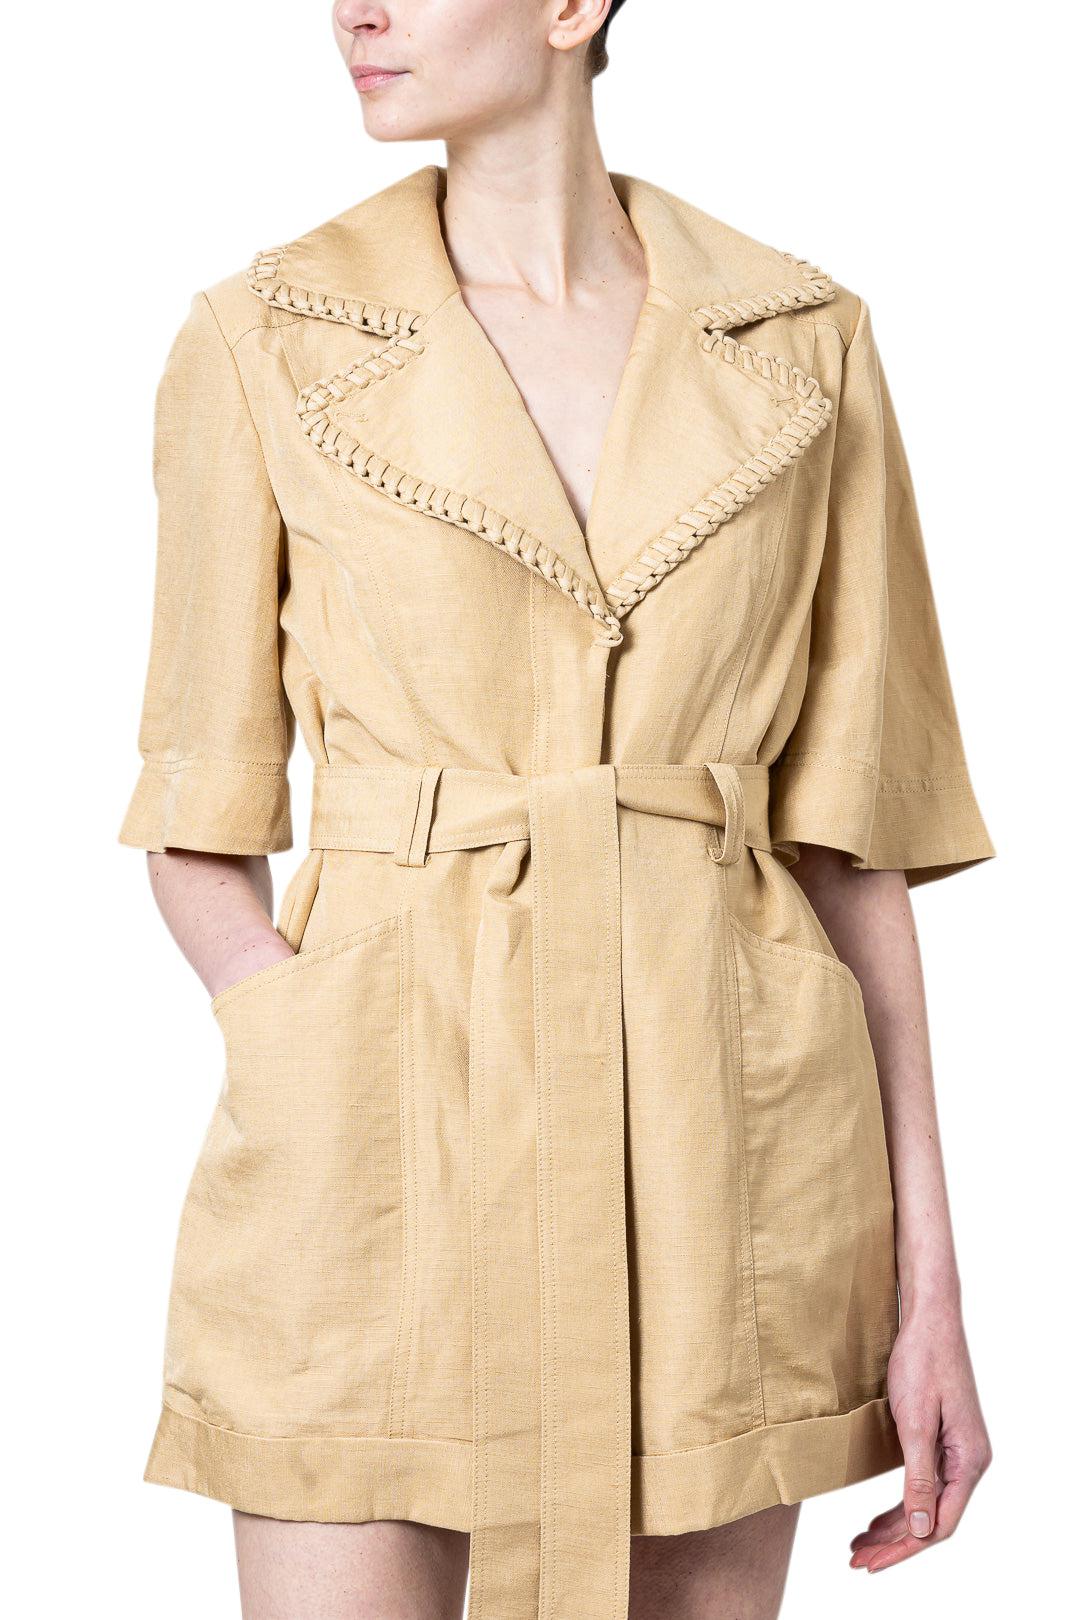 Aje-Tactilr Whipstitch Playsuit-dgallerystore